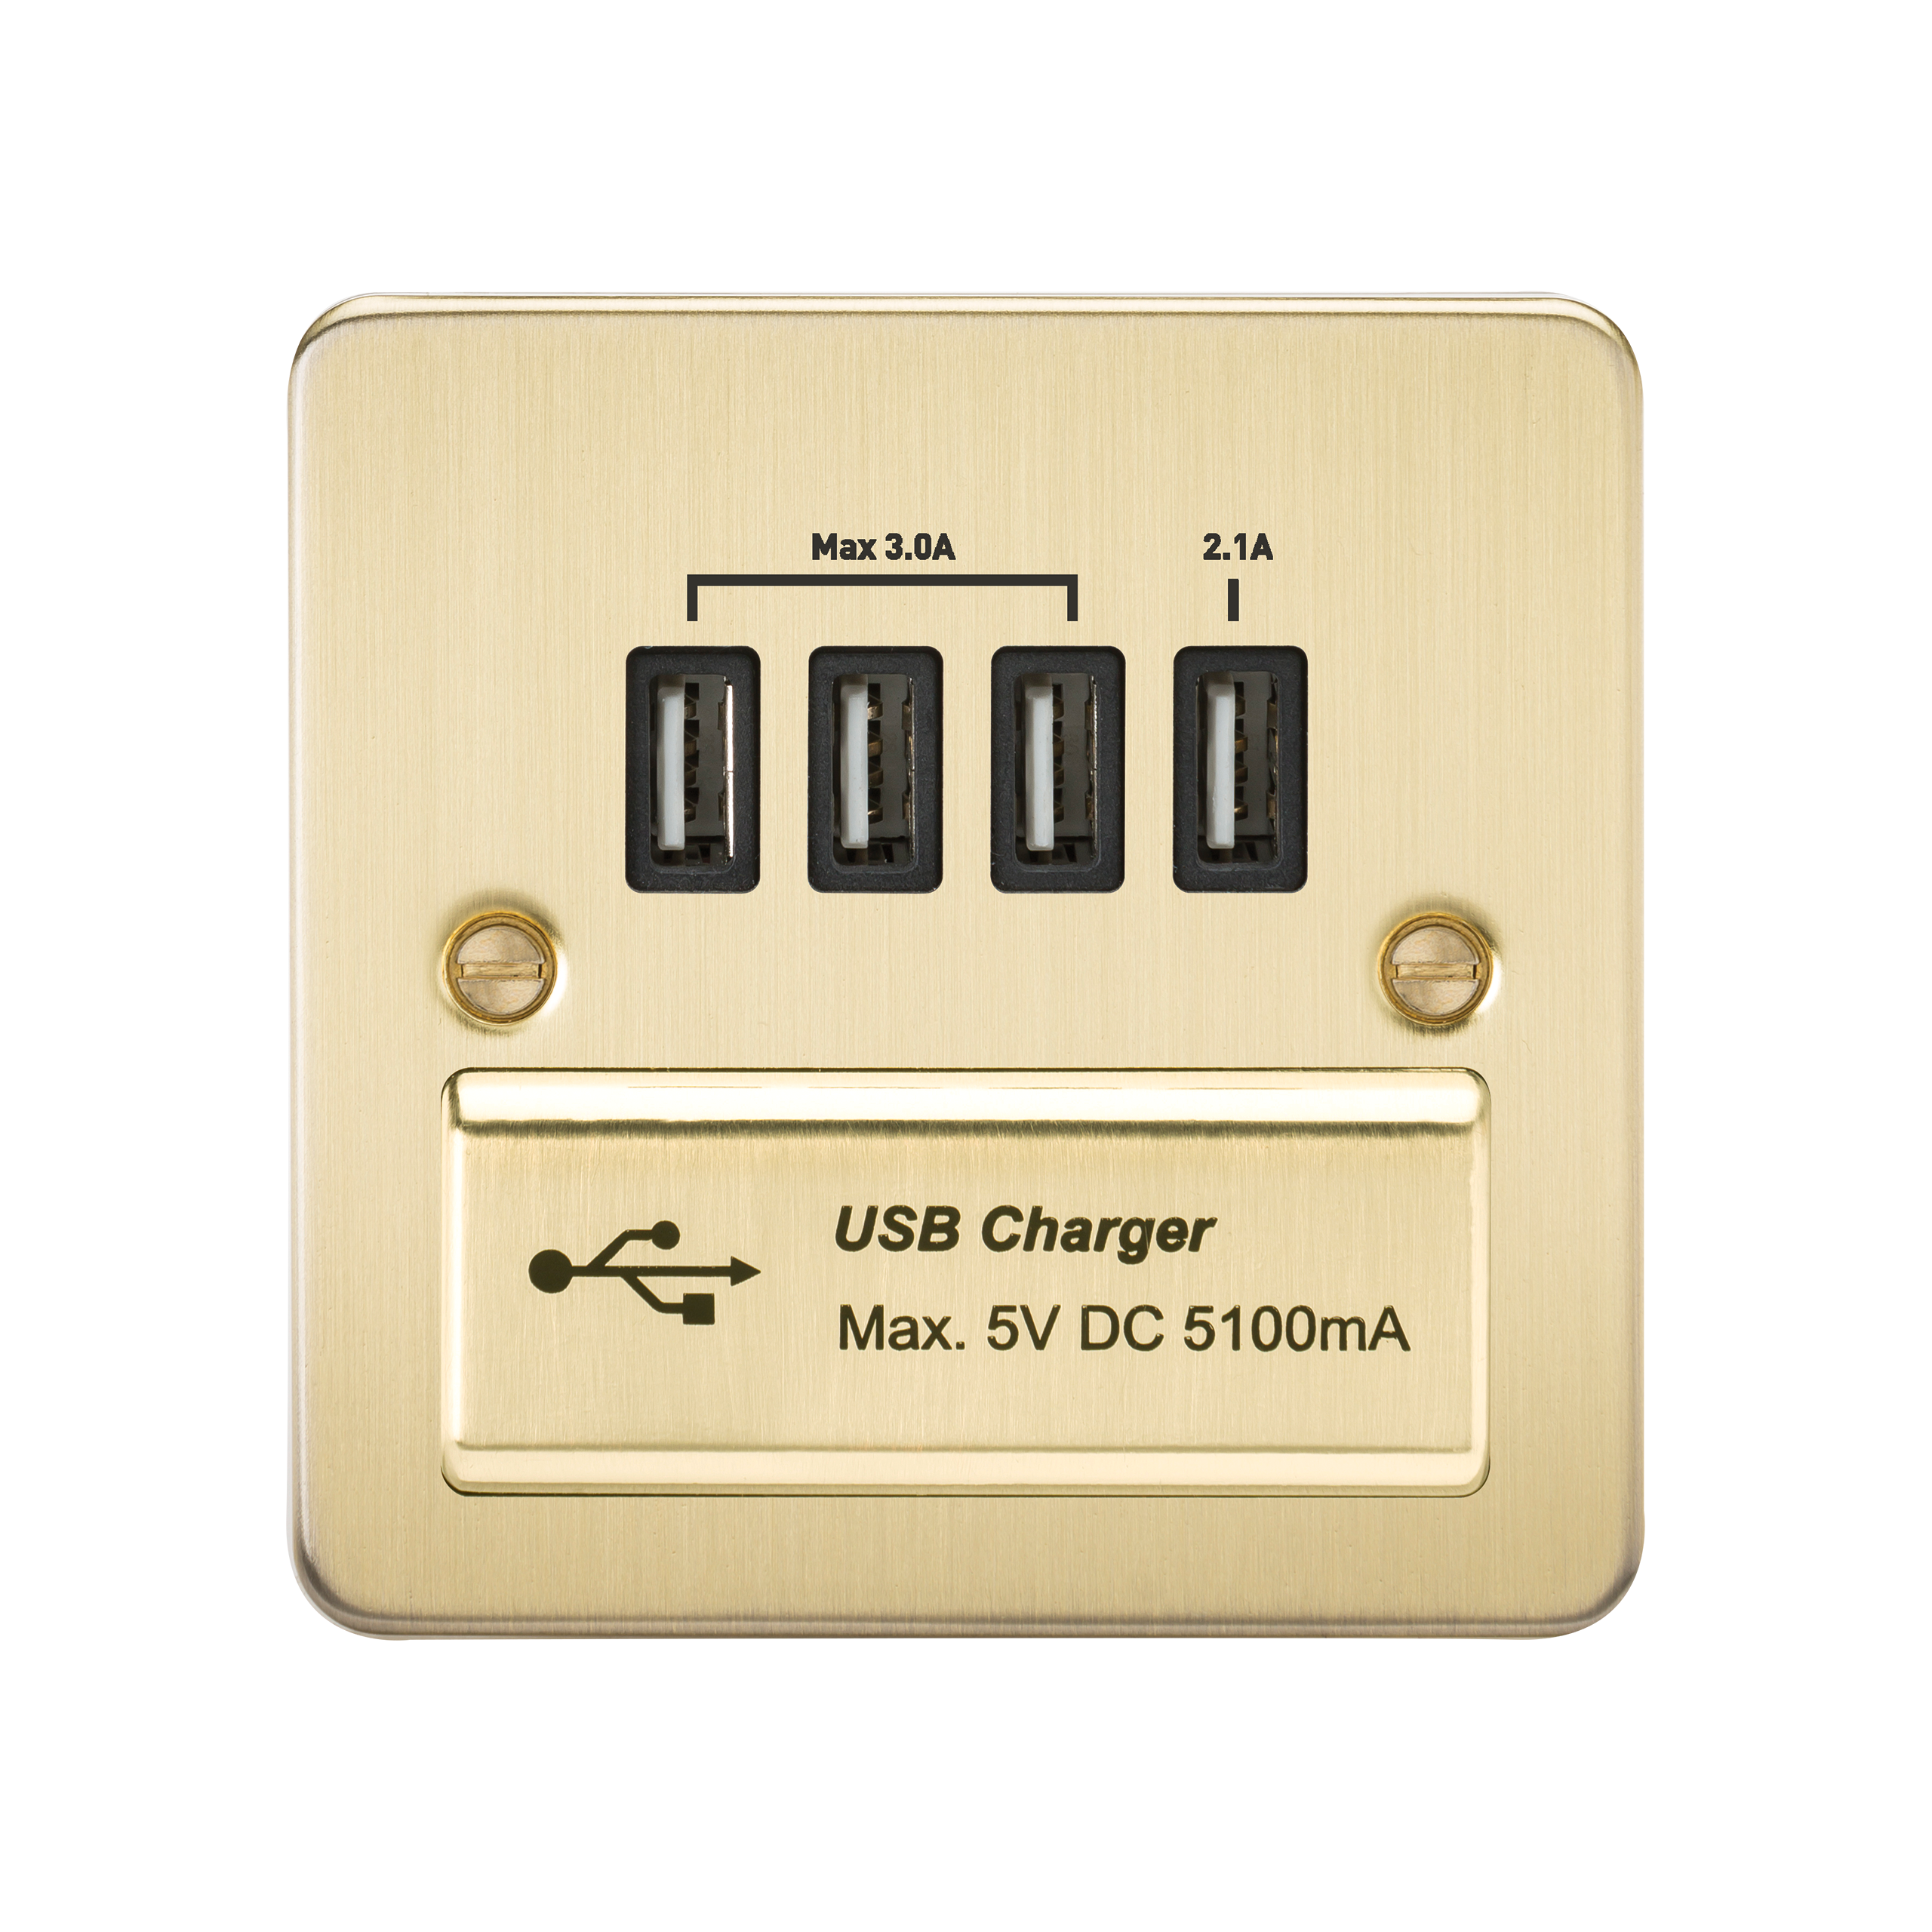 Flat Plate Quad USB Charger Outlet - Brushed Brass With Black Insert - FPQUADBB 